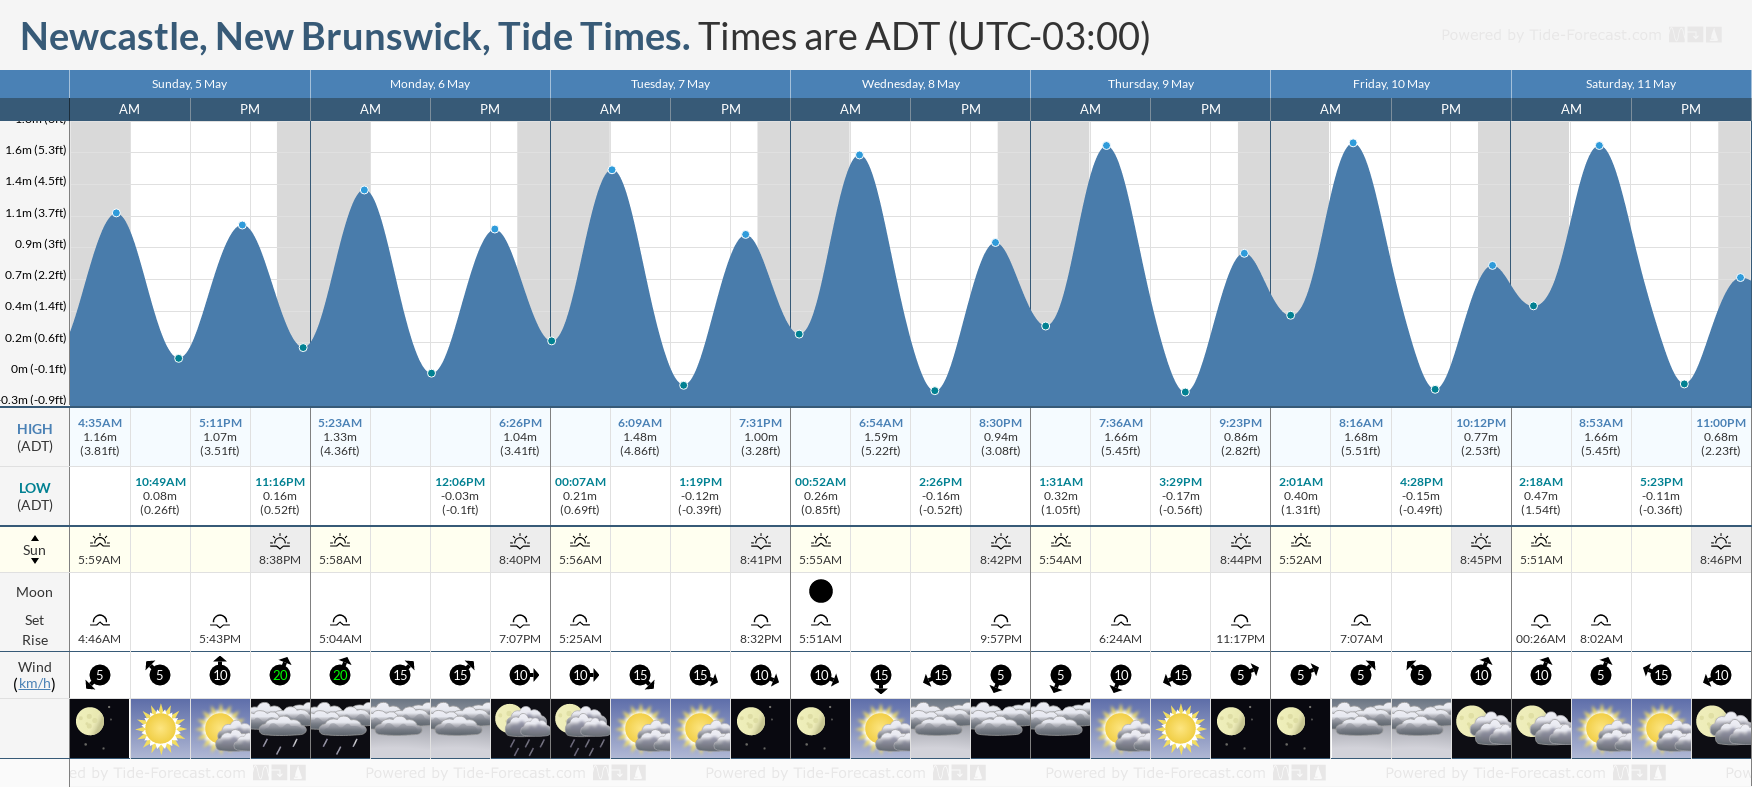 Newcastle, New Brunswick Tide Chart including high and low tide tide times for the next 7 days